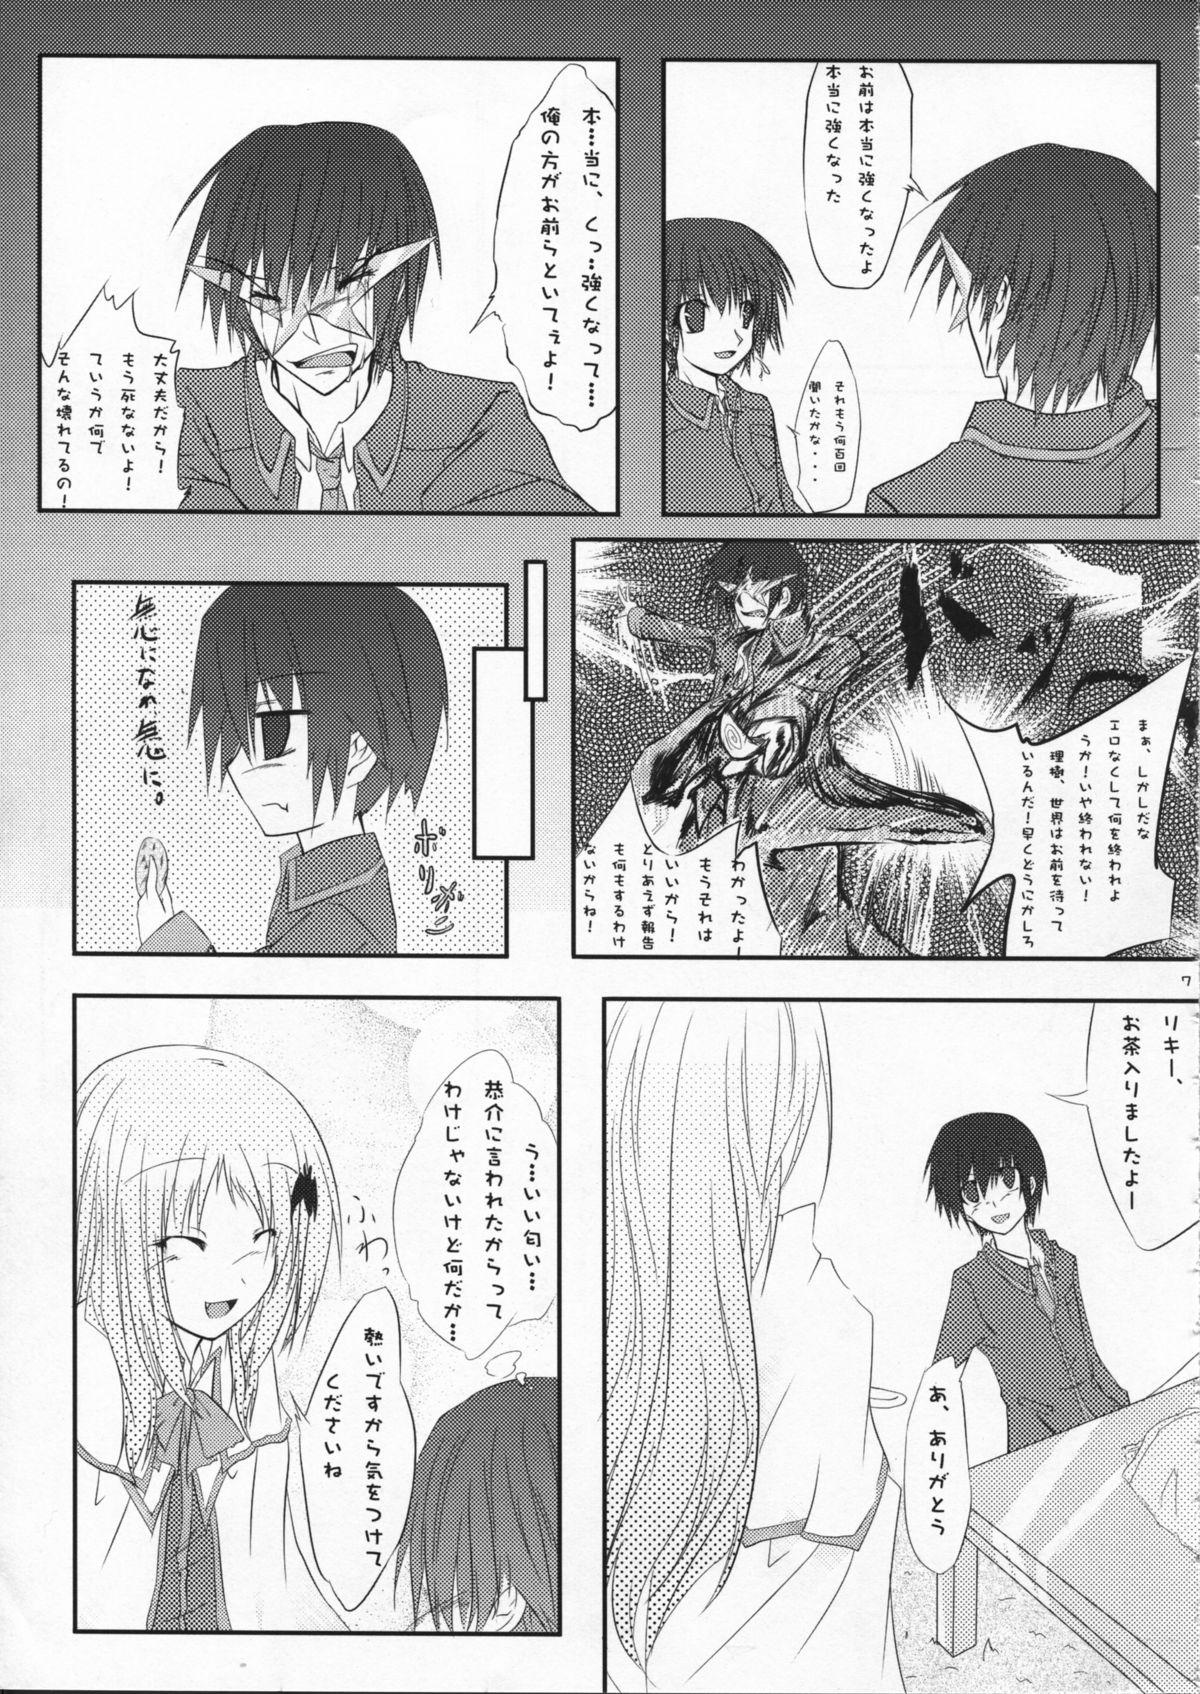 Fishnets Wanko no Jikan - Little busters Gay Dudes - Page 7